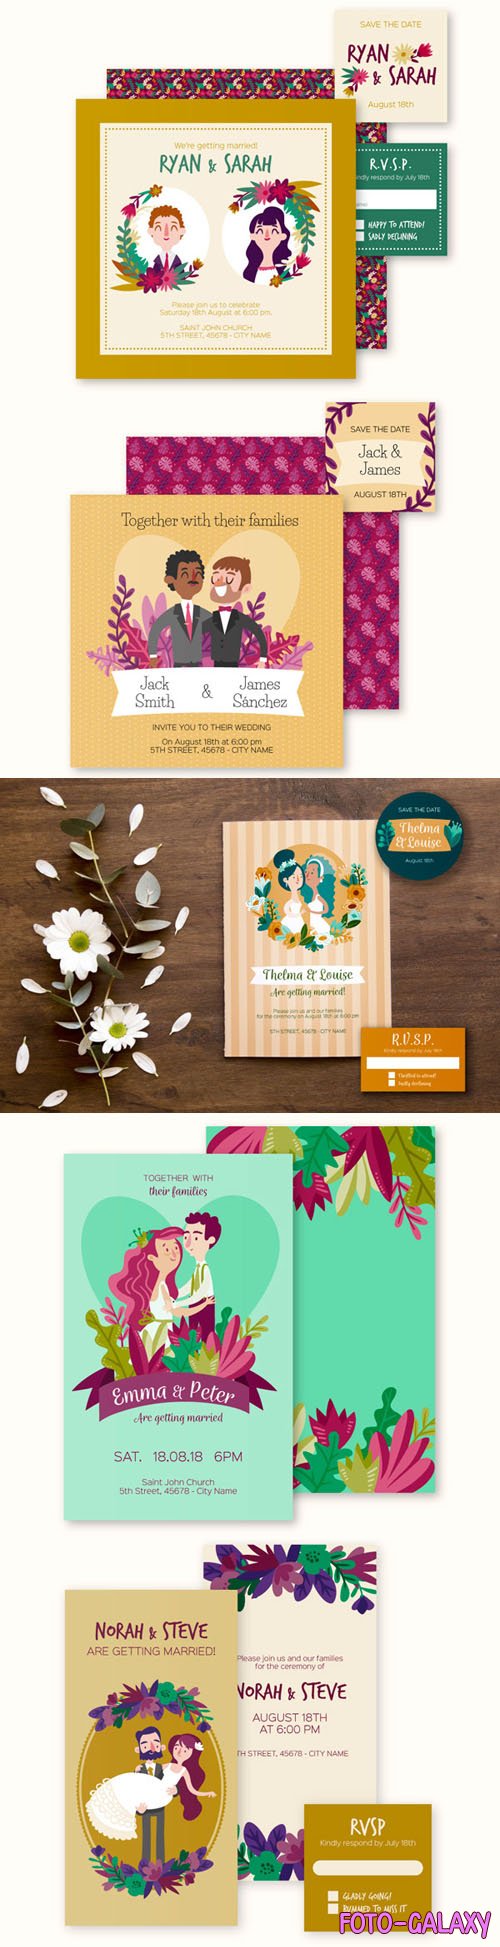 Colorful Hand Drawn Wedding Stationery Vector Templates